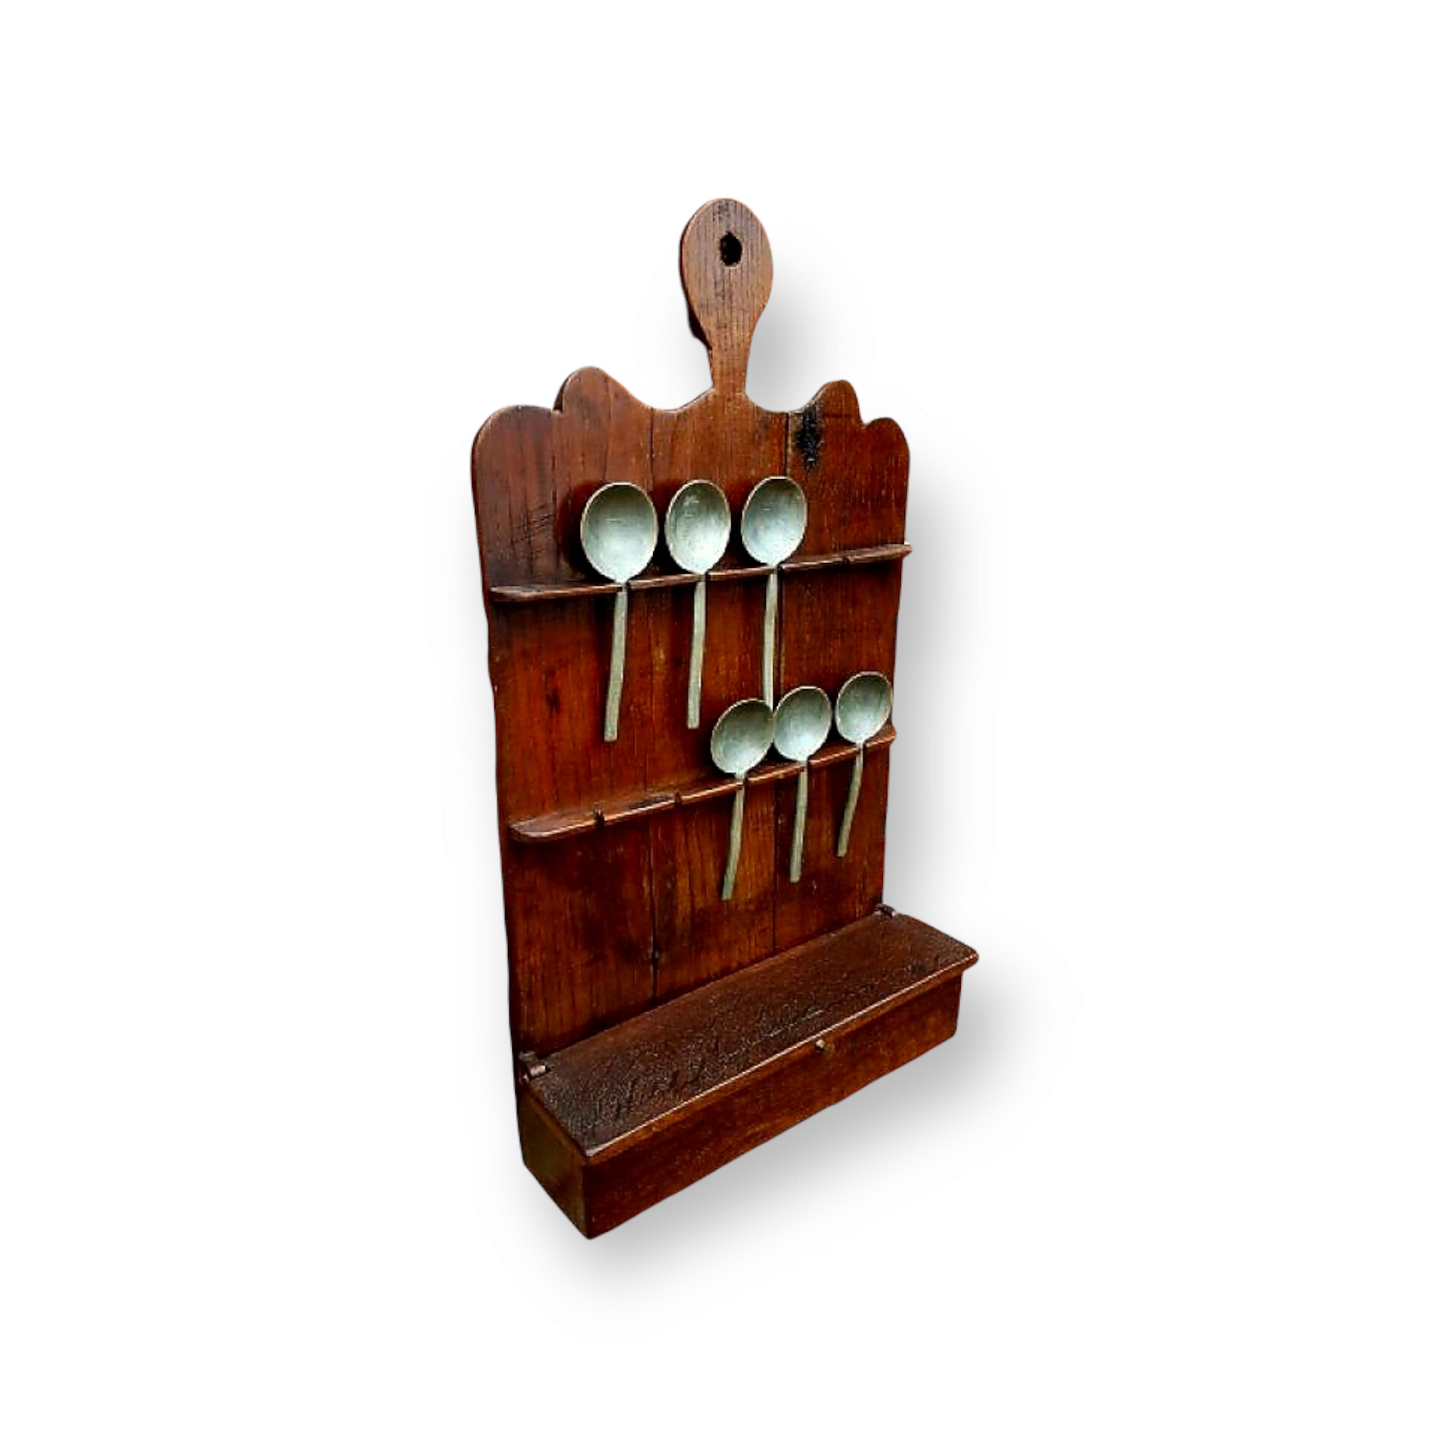 Late 18th Century George III Period English Antique Oak Spoon Rack with Associated Set of 6 x 17thC Pewter Spoons